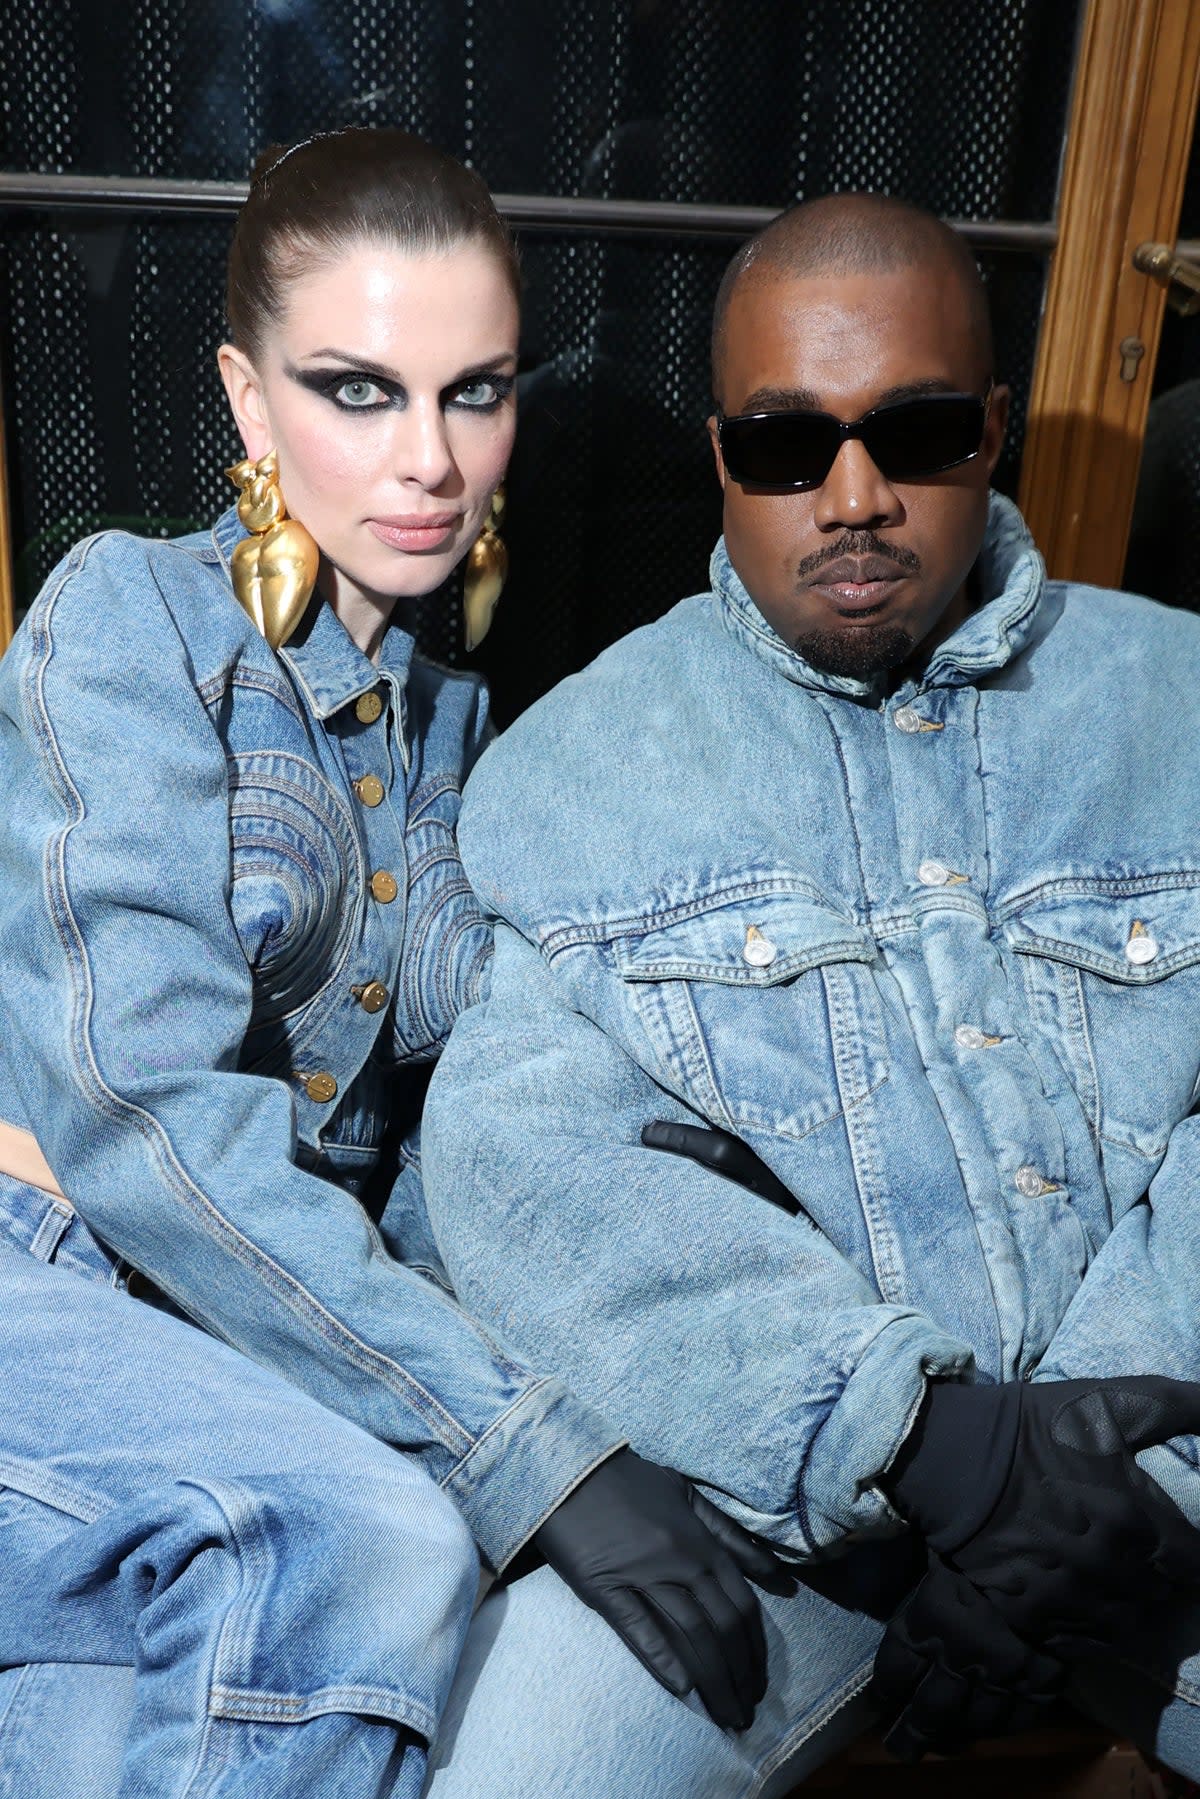 Public affair: Fox and Kanye West attend a Paris fashion show in early 2022 (Getty)